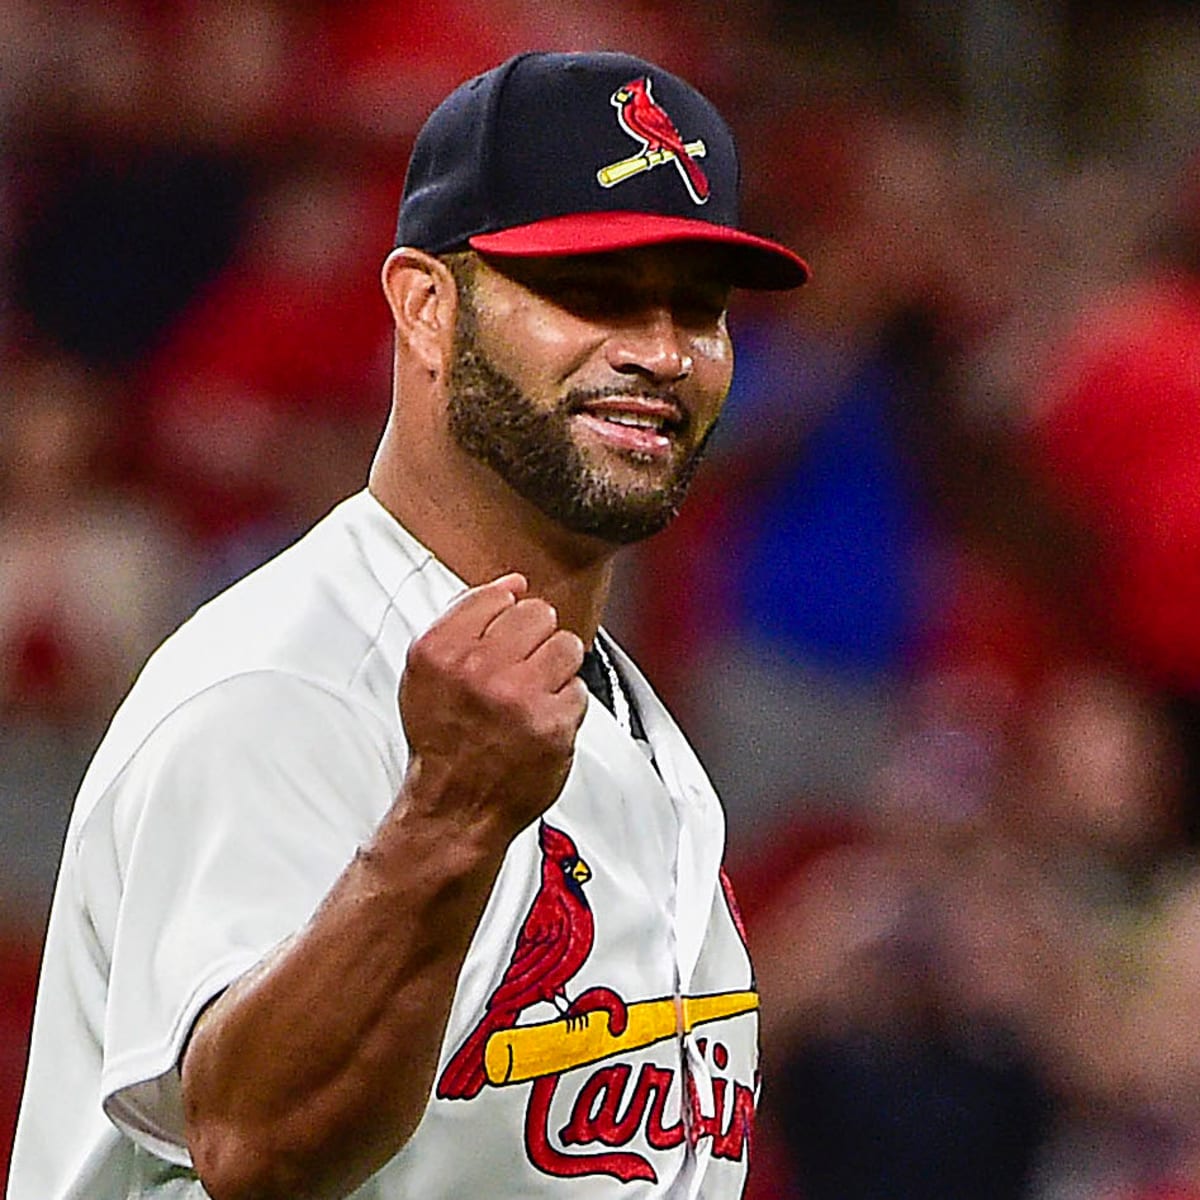 Pujolspalooza! All-Stars orbit around Cardinals great Pujols as he shines  in his final Derby